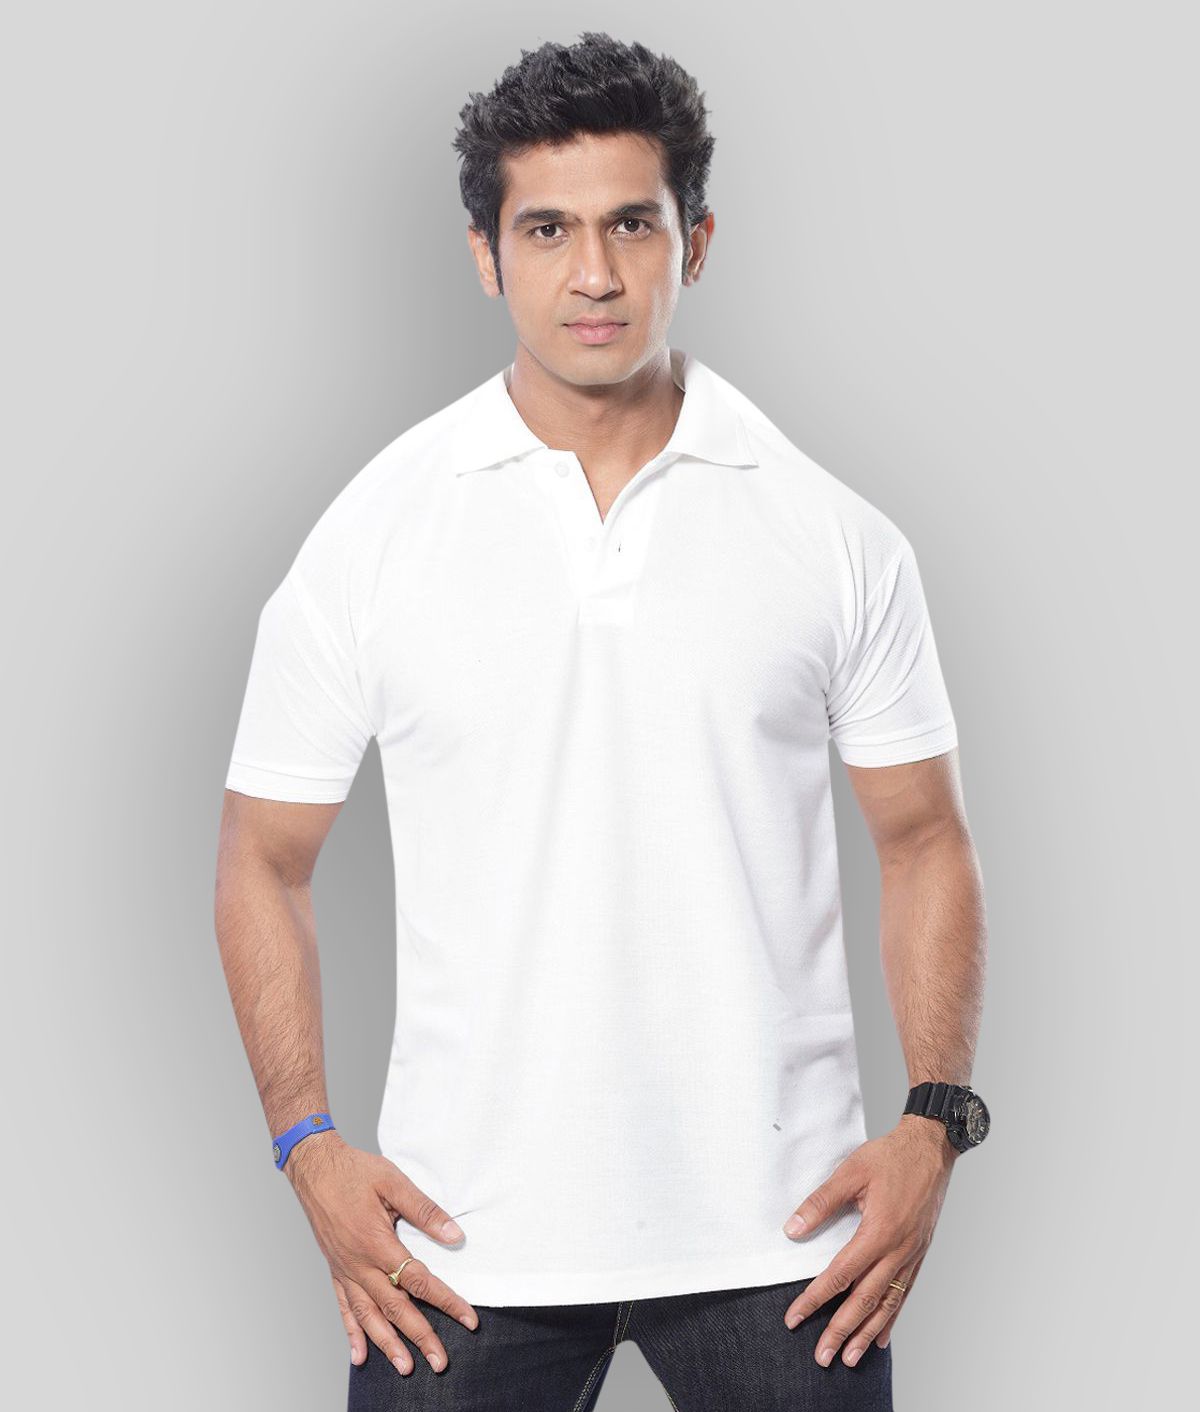     			in365 - White Cotton Blend Regular Fit Men's Polo T Shirt ( Pack of 1 )